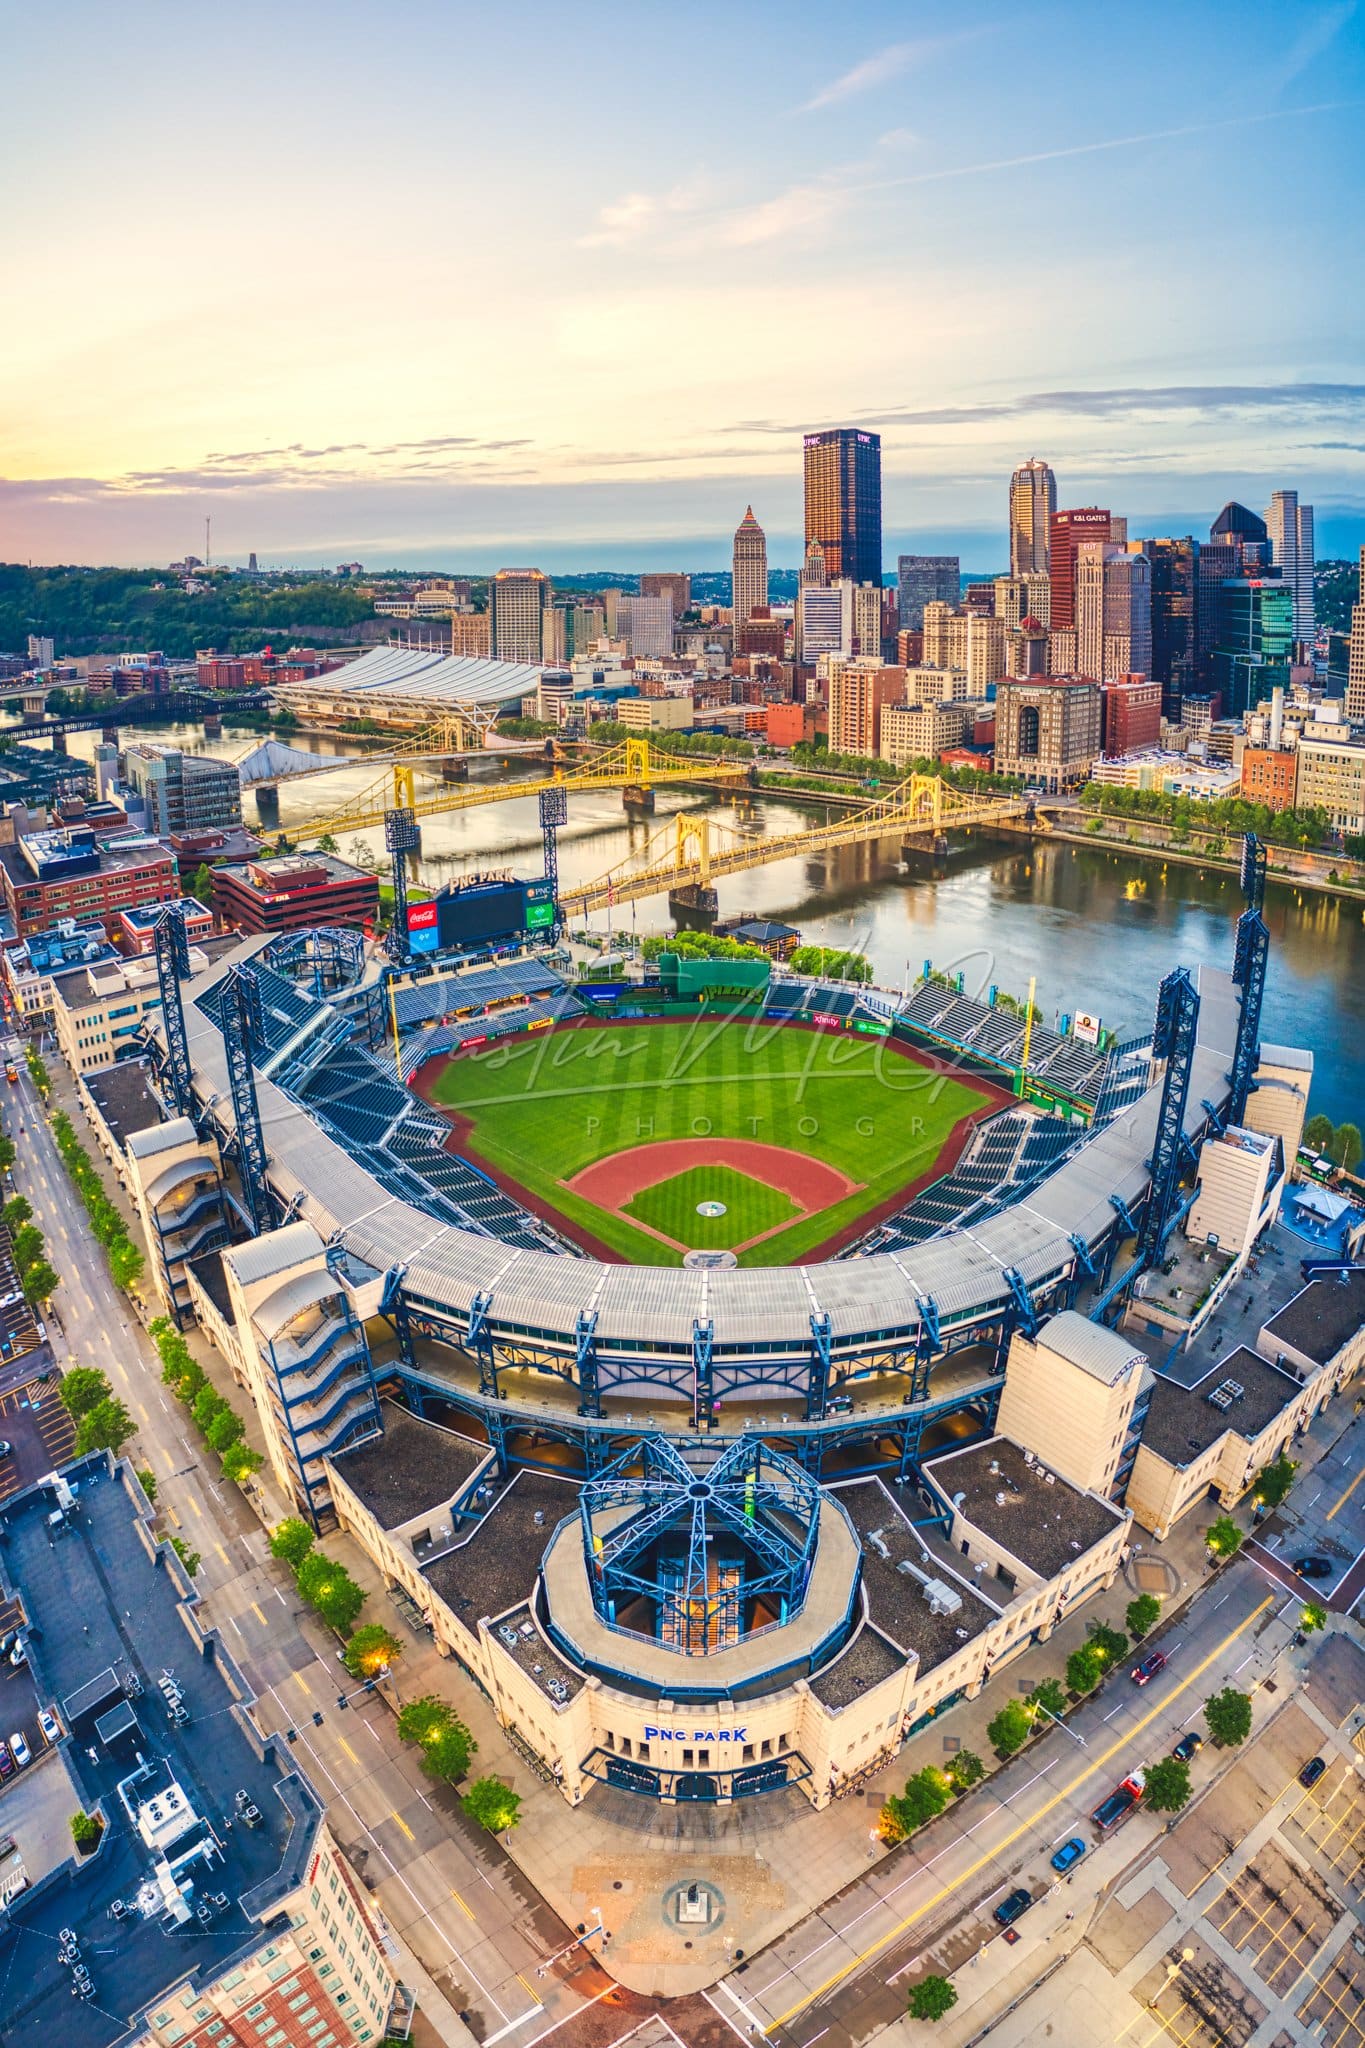 Photo of PNC Park and Pittsburgh Skyline, PNC Park Picture